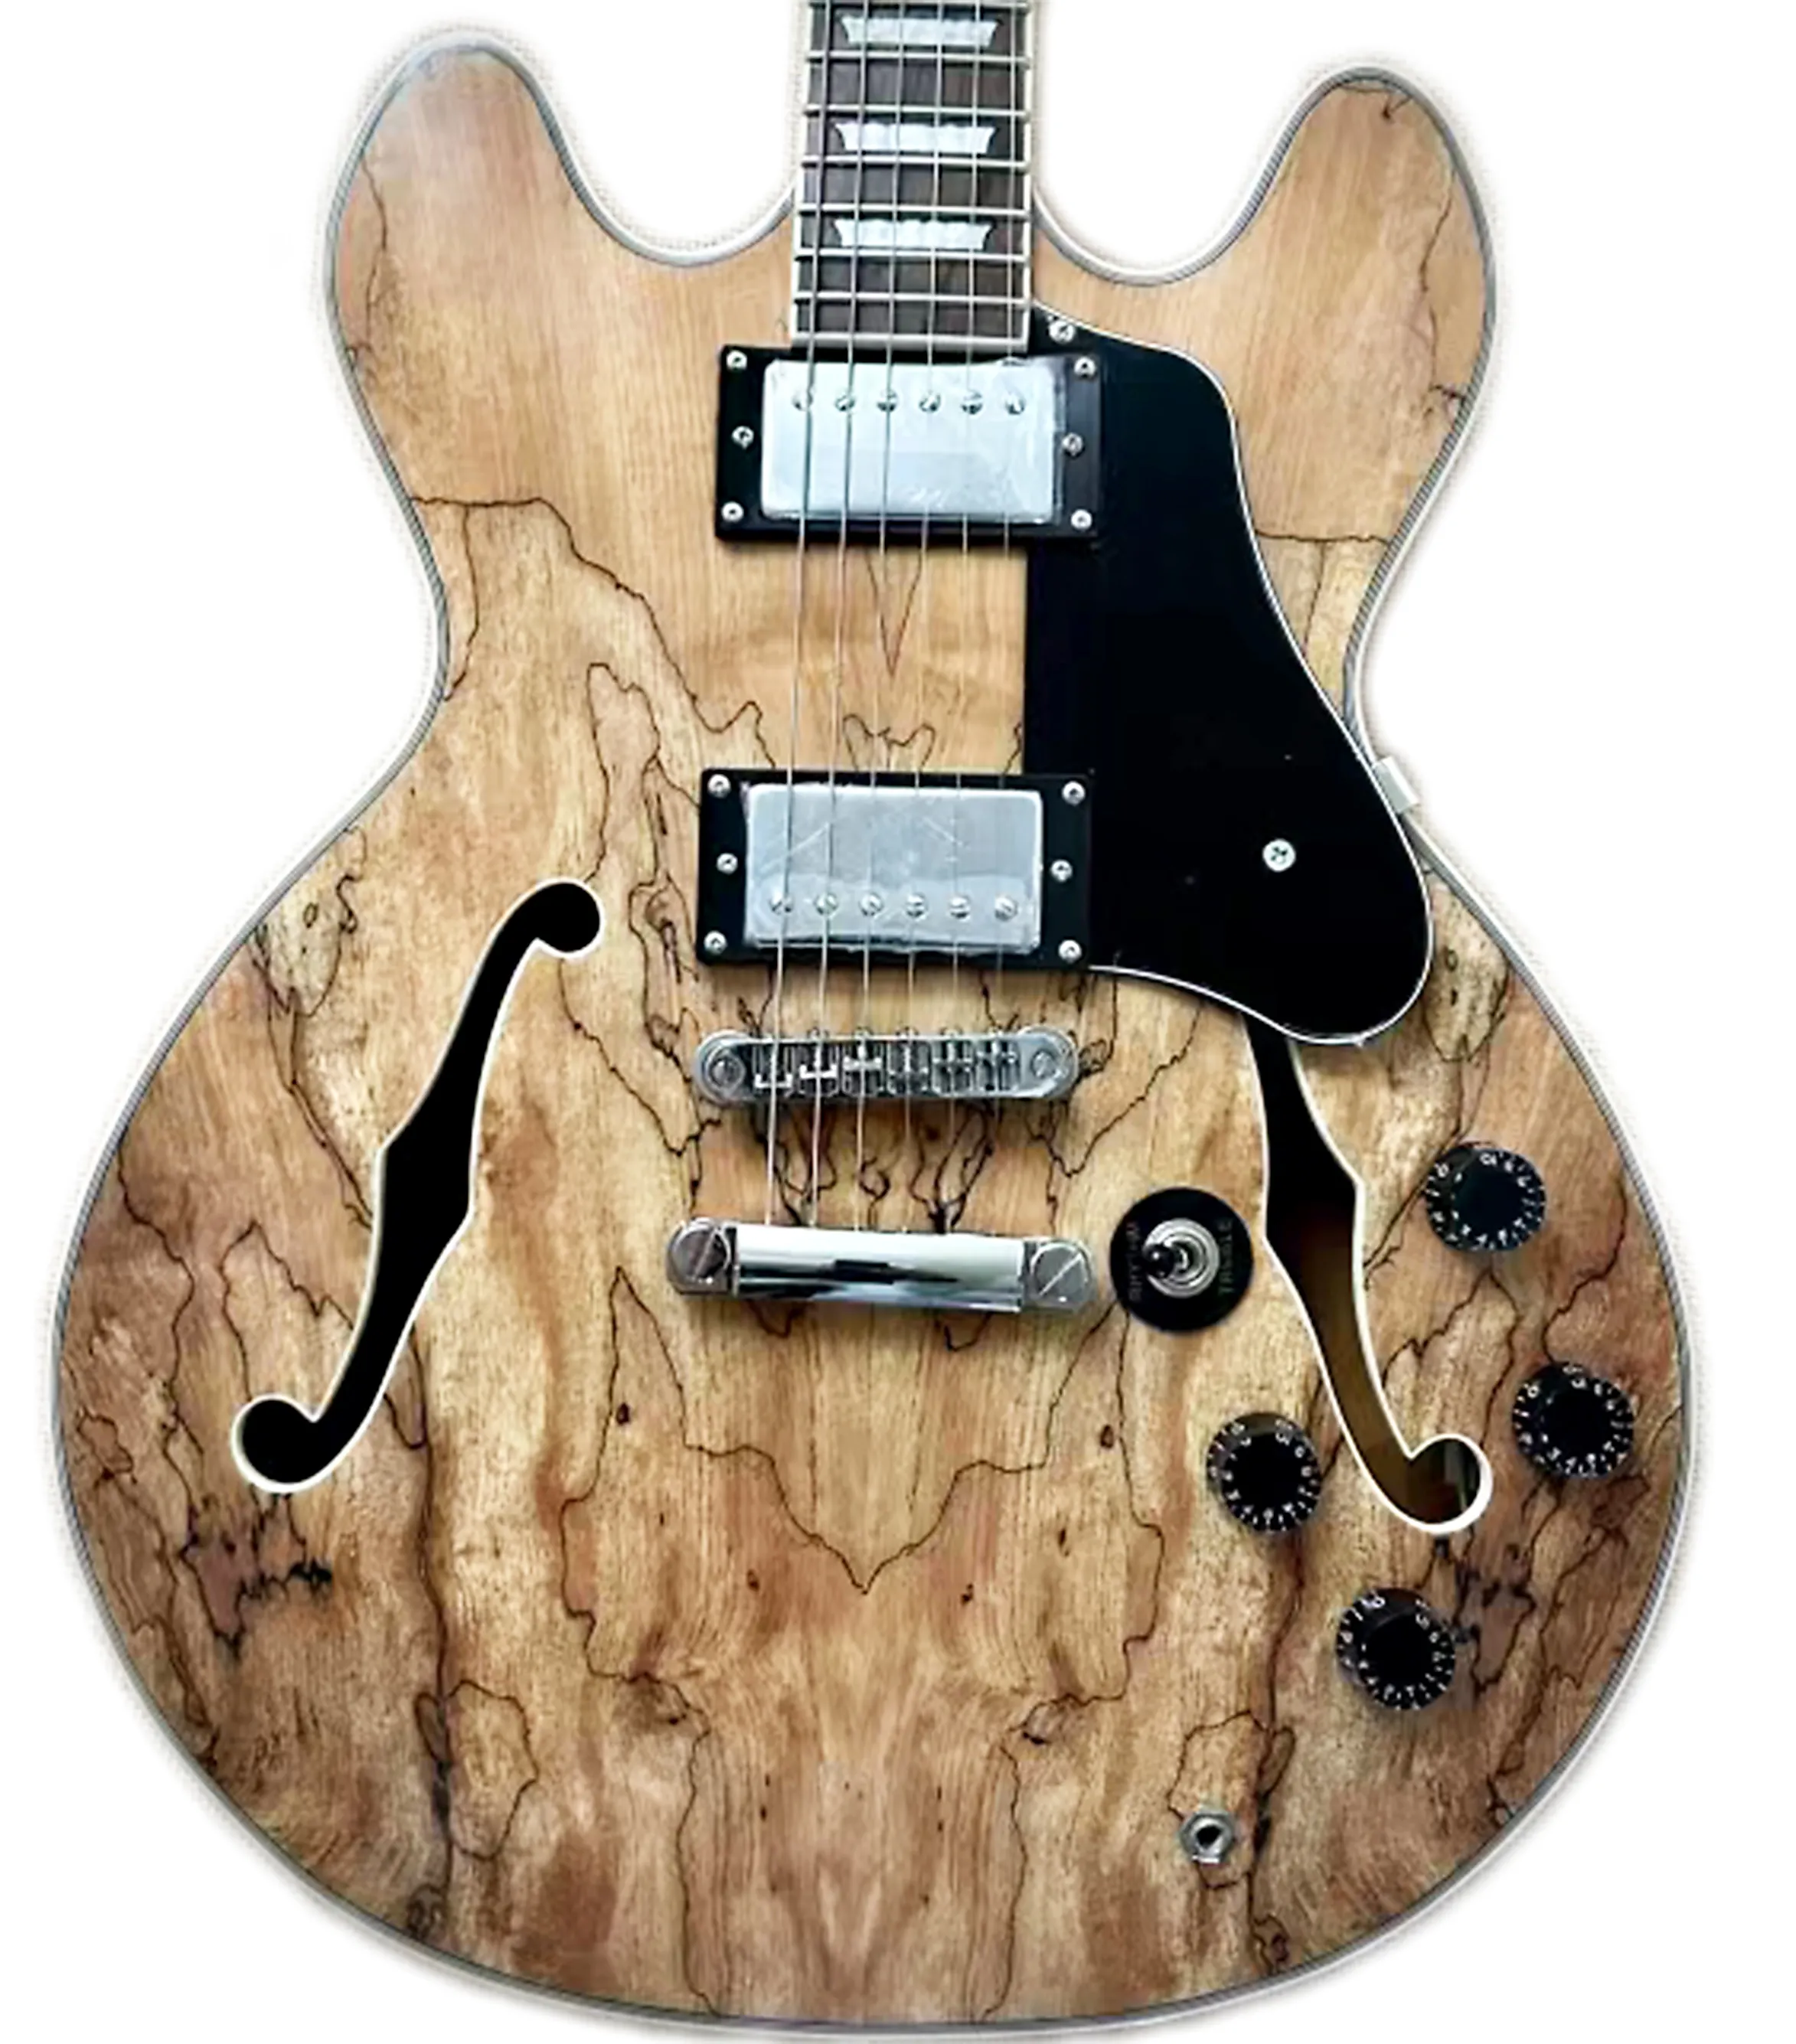 ELECTRIC GUITAR JAZZ HOLLOW BODY WITH TIGER VEIN GUITAR DISTRIBUTE